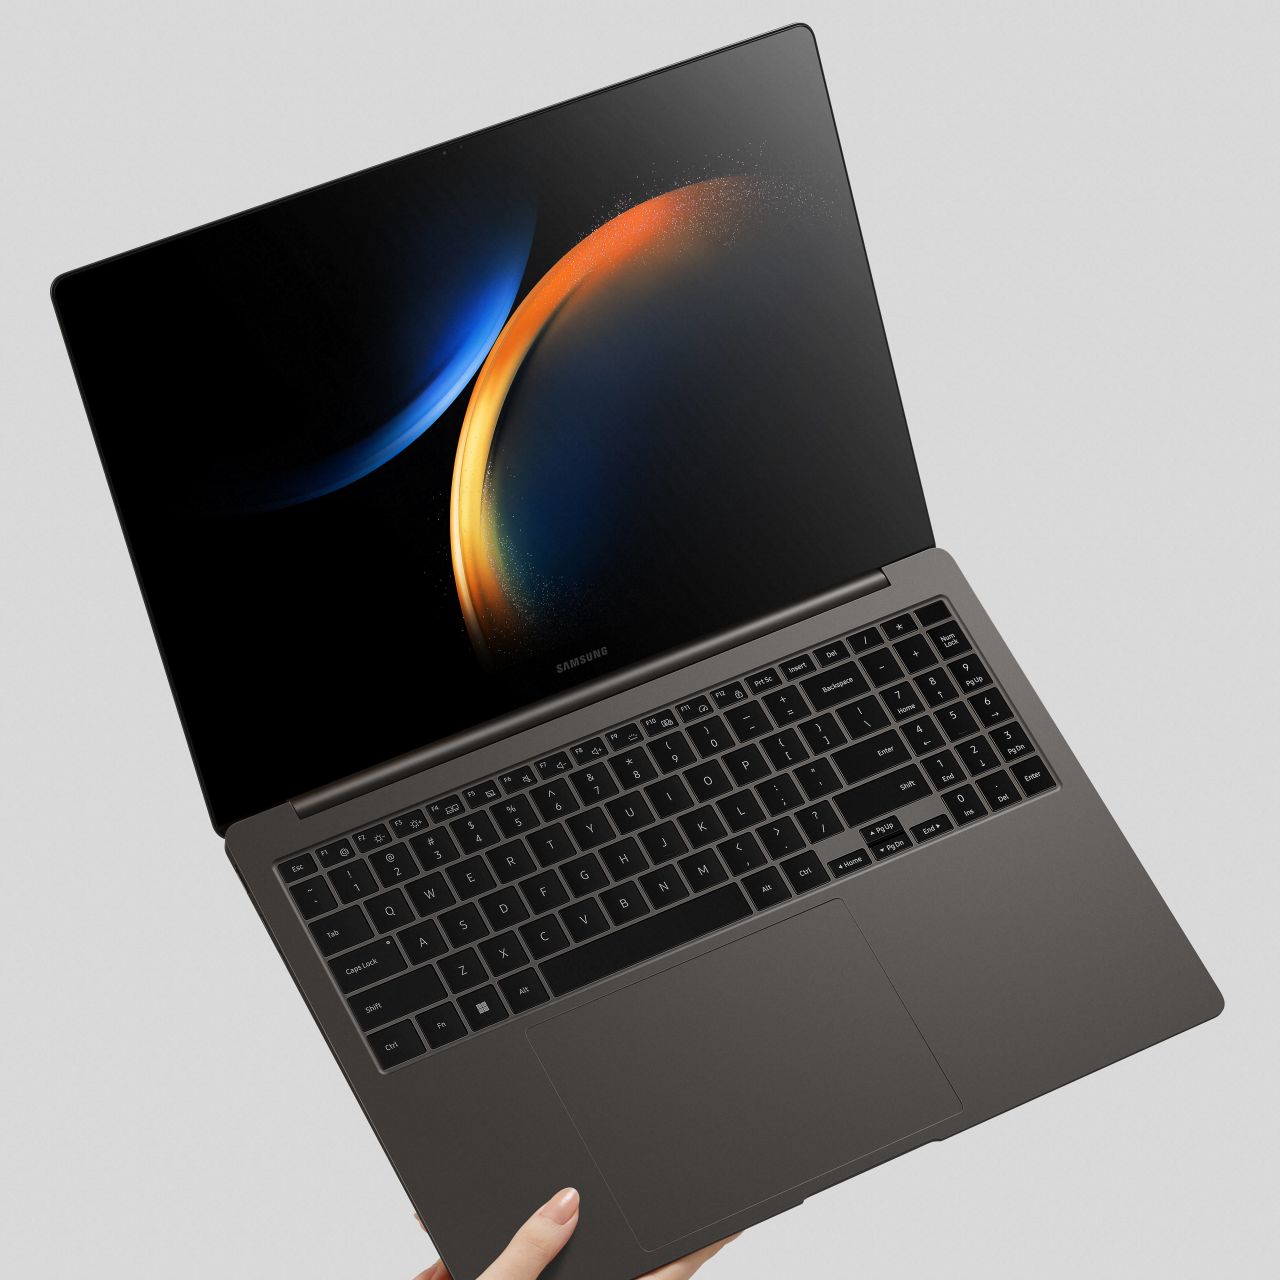 Does the Galaxy Book 3 Pro 360 have 5G? It's so unclear. Needless to say  Samsung support has no clue (as usual). There is mixed information on the  website on different pages. 